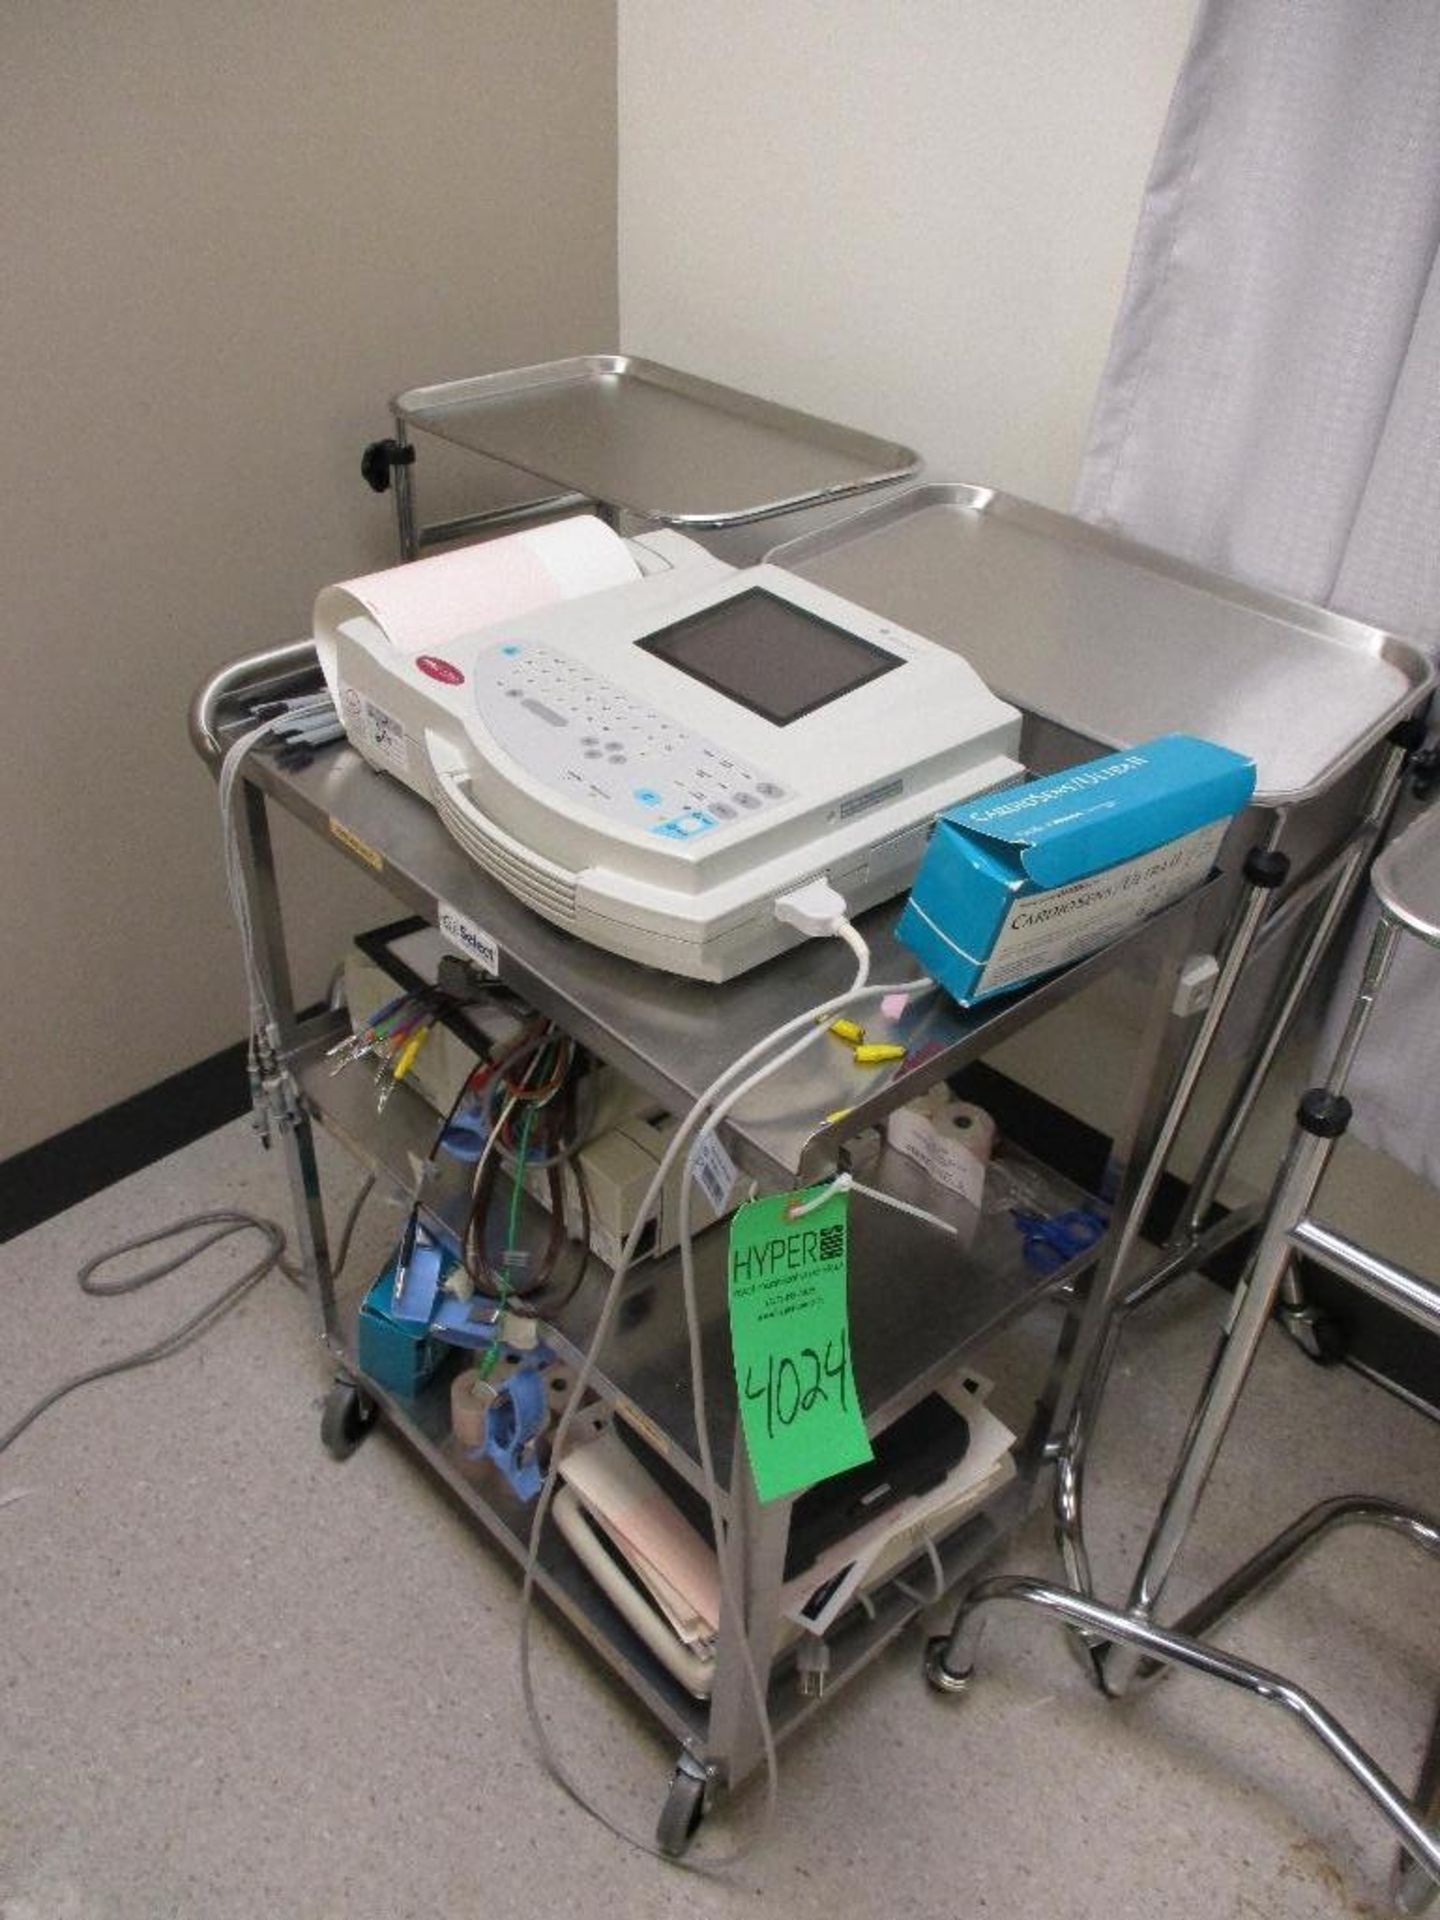 EKG Machine, cart and 3 bed side table trays